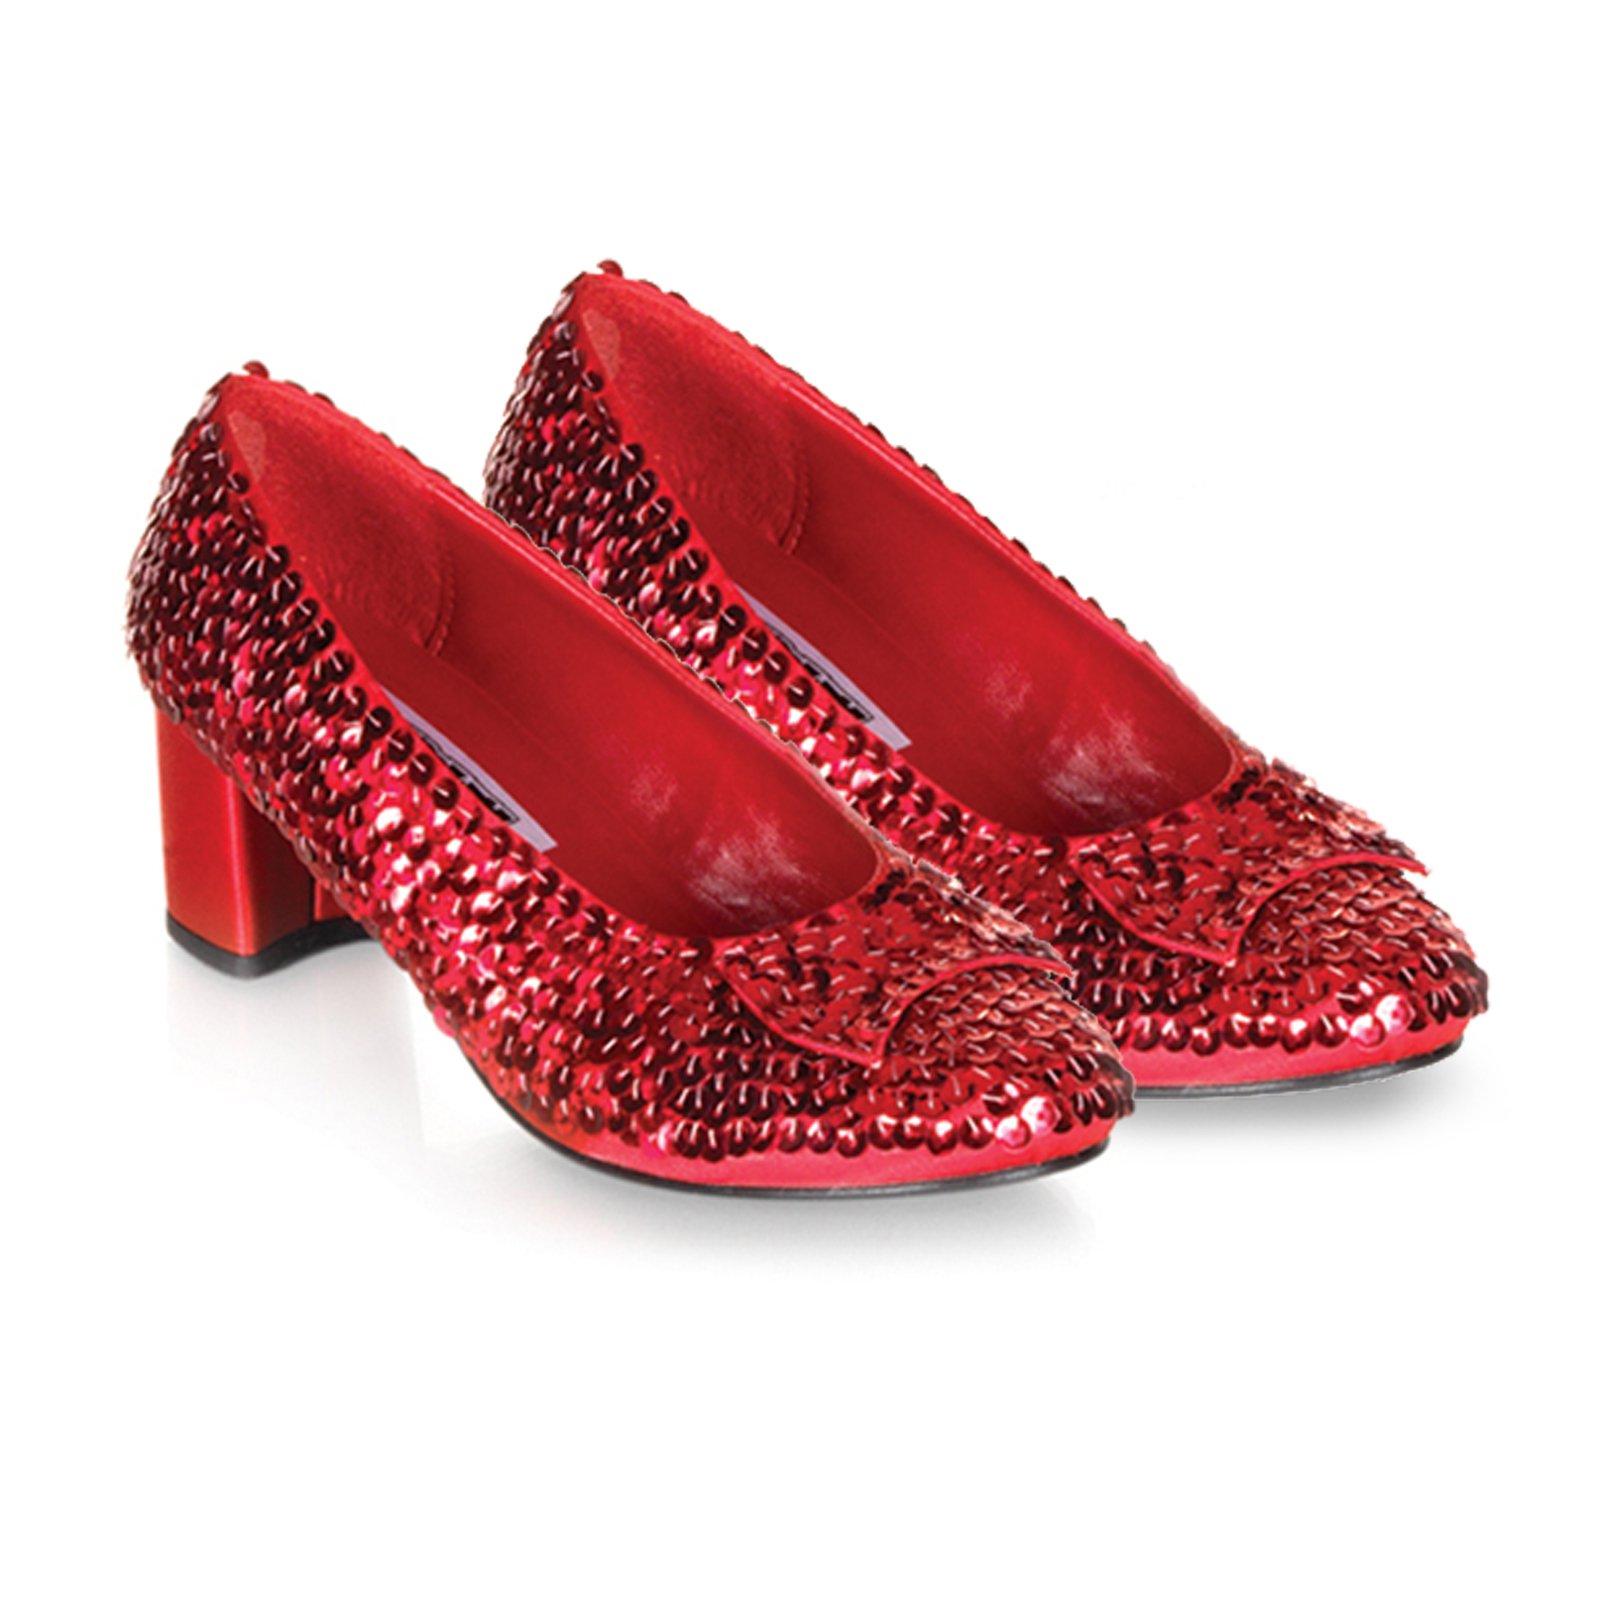 Sequin Dorothy  Red  Child Shoes   Dorothy S Ruby Red Sequined Shoes    